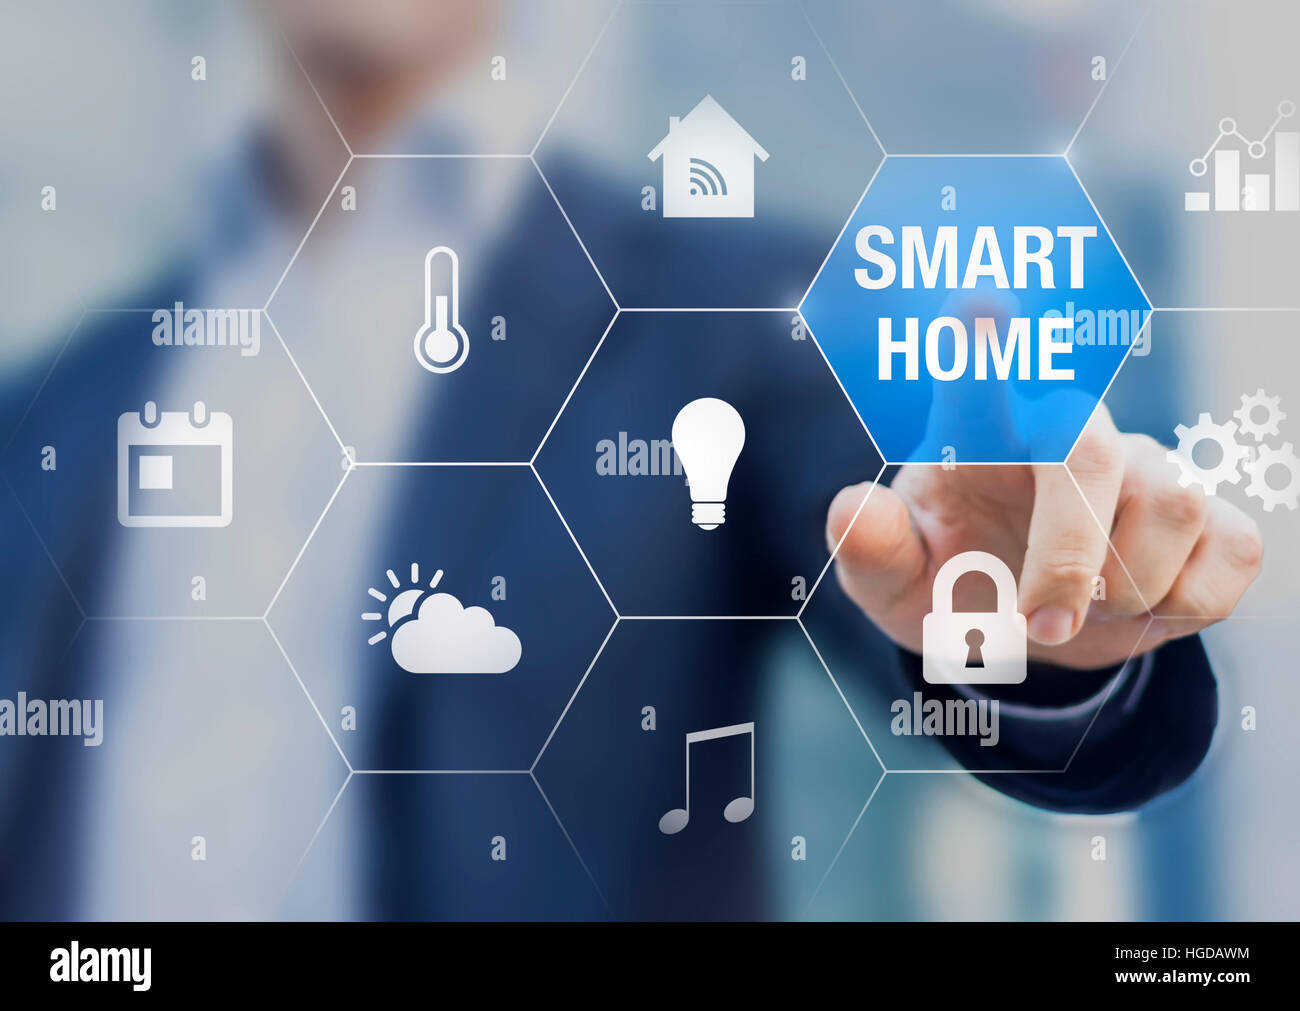 Smart home automation concept with icons showing the functionalities of this new technology and a person touching a button Stock Photo